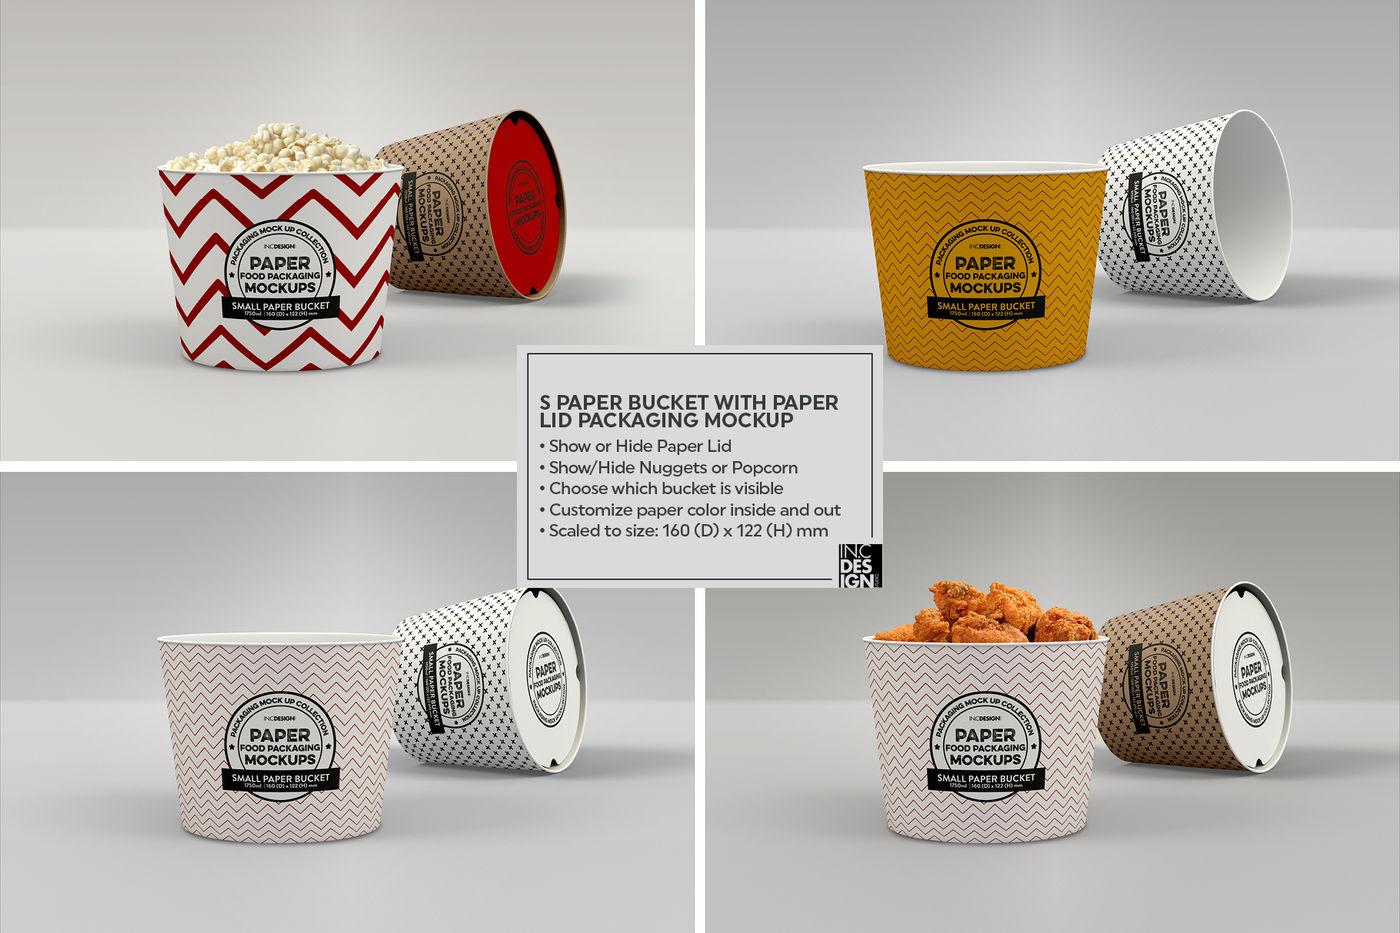 Download Vol 12 Paper Food Box Packaging Mockup Collection By Inc Design Studio Thehungryjpeg Com